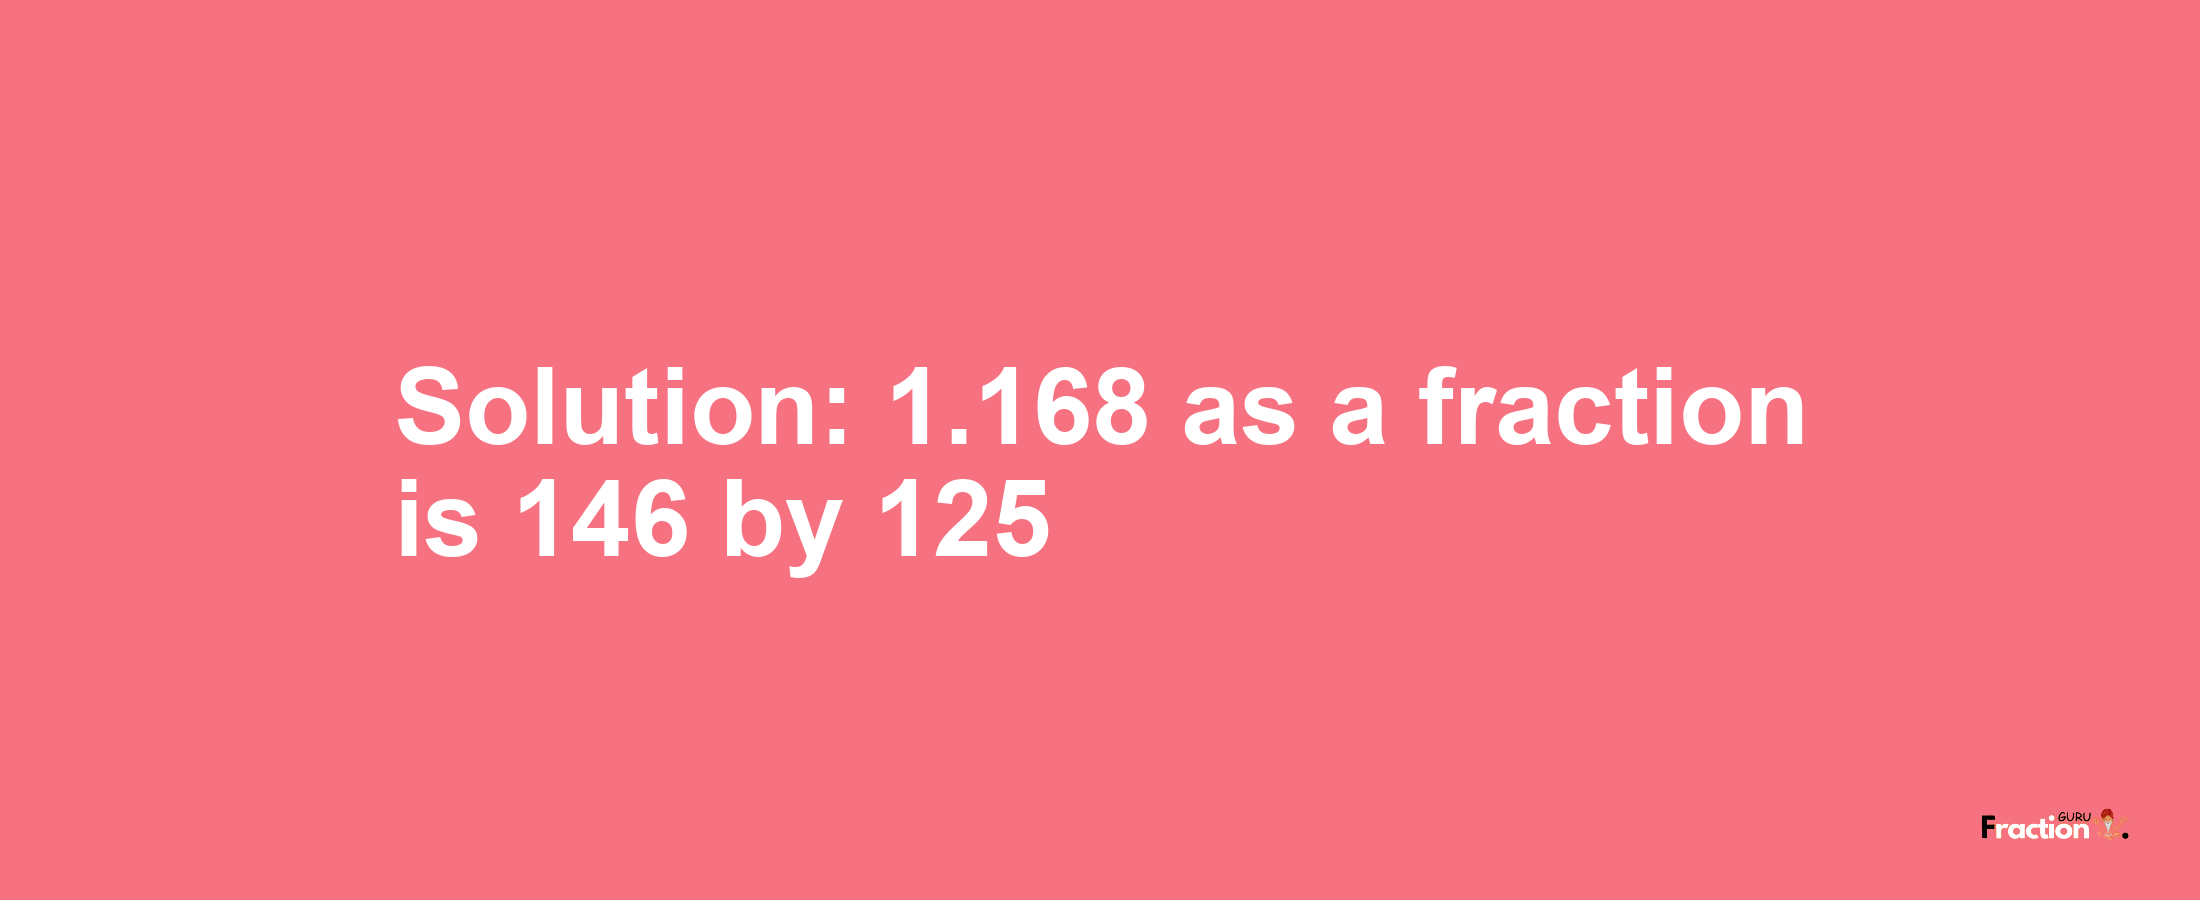 Solution:1.168 as a fraction is 146/125